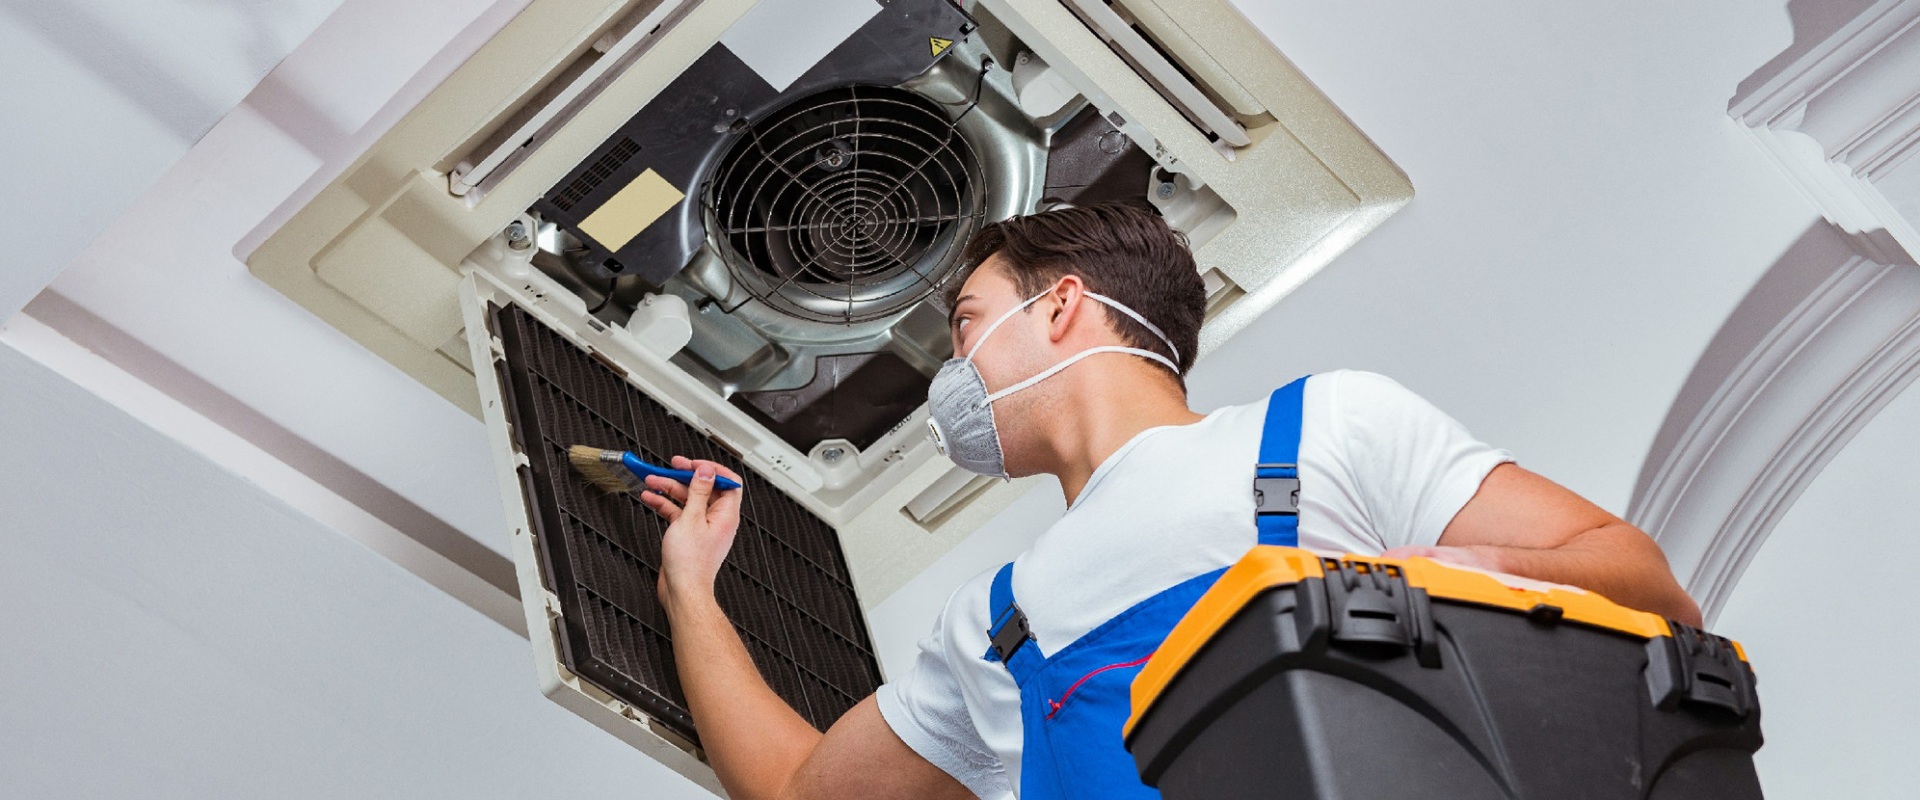 Duct Repair Services in Miami Shores, Florida: Get the Best Value for Your Money